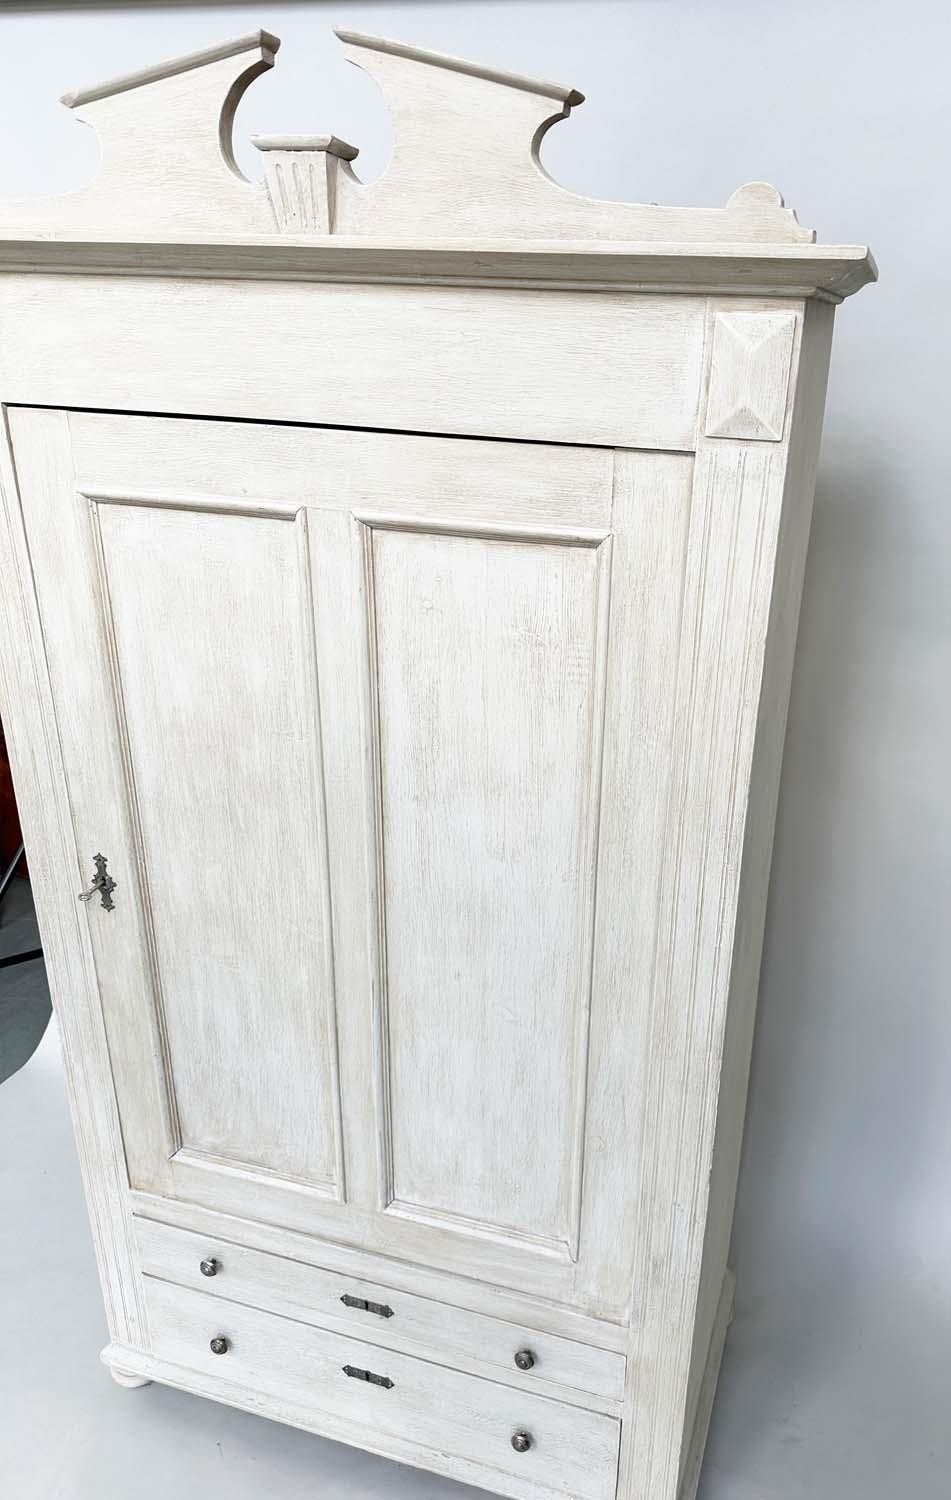 ARMOIRE, 19th century French grey painted with single panelled door enclosing hanging space above - Image 12 of 13